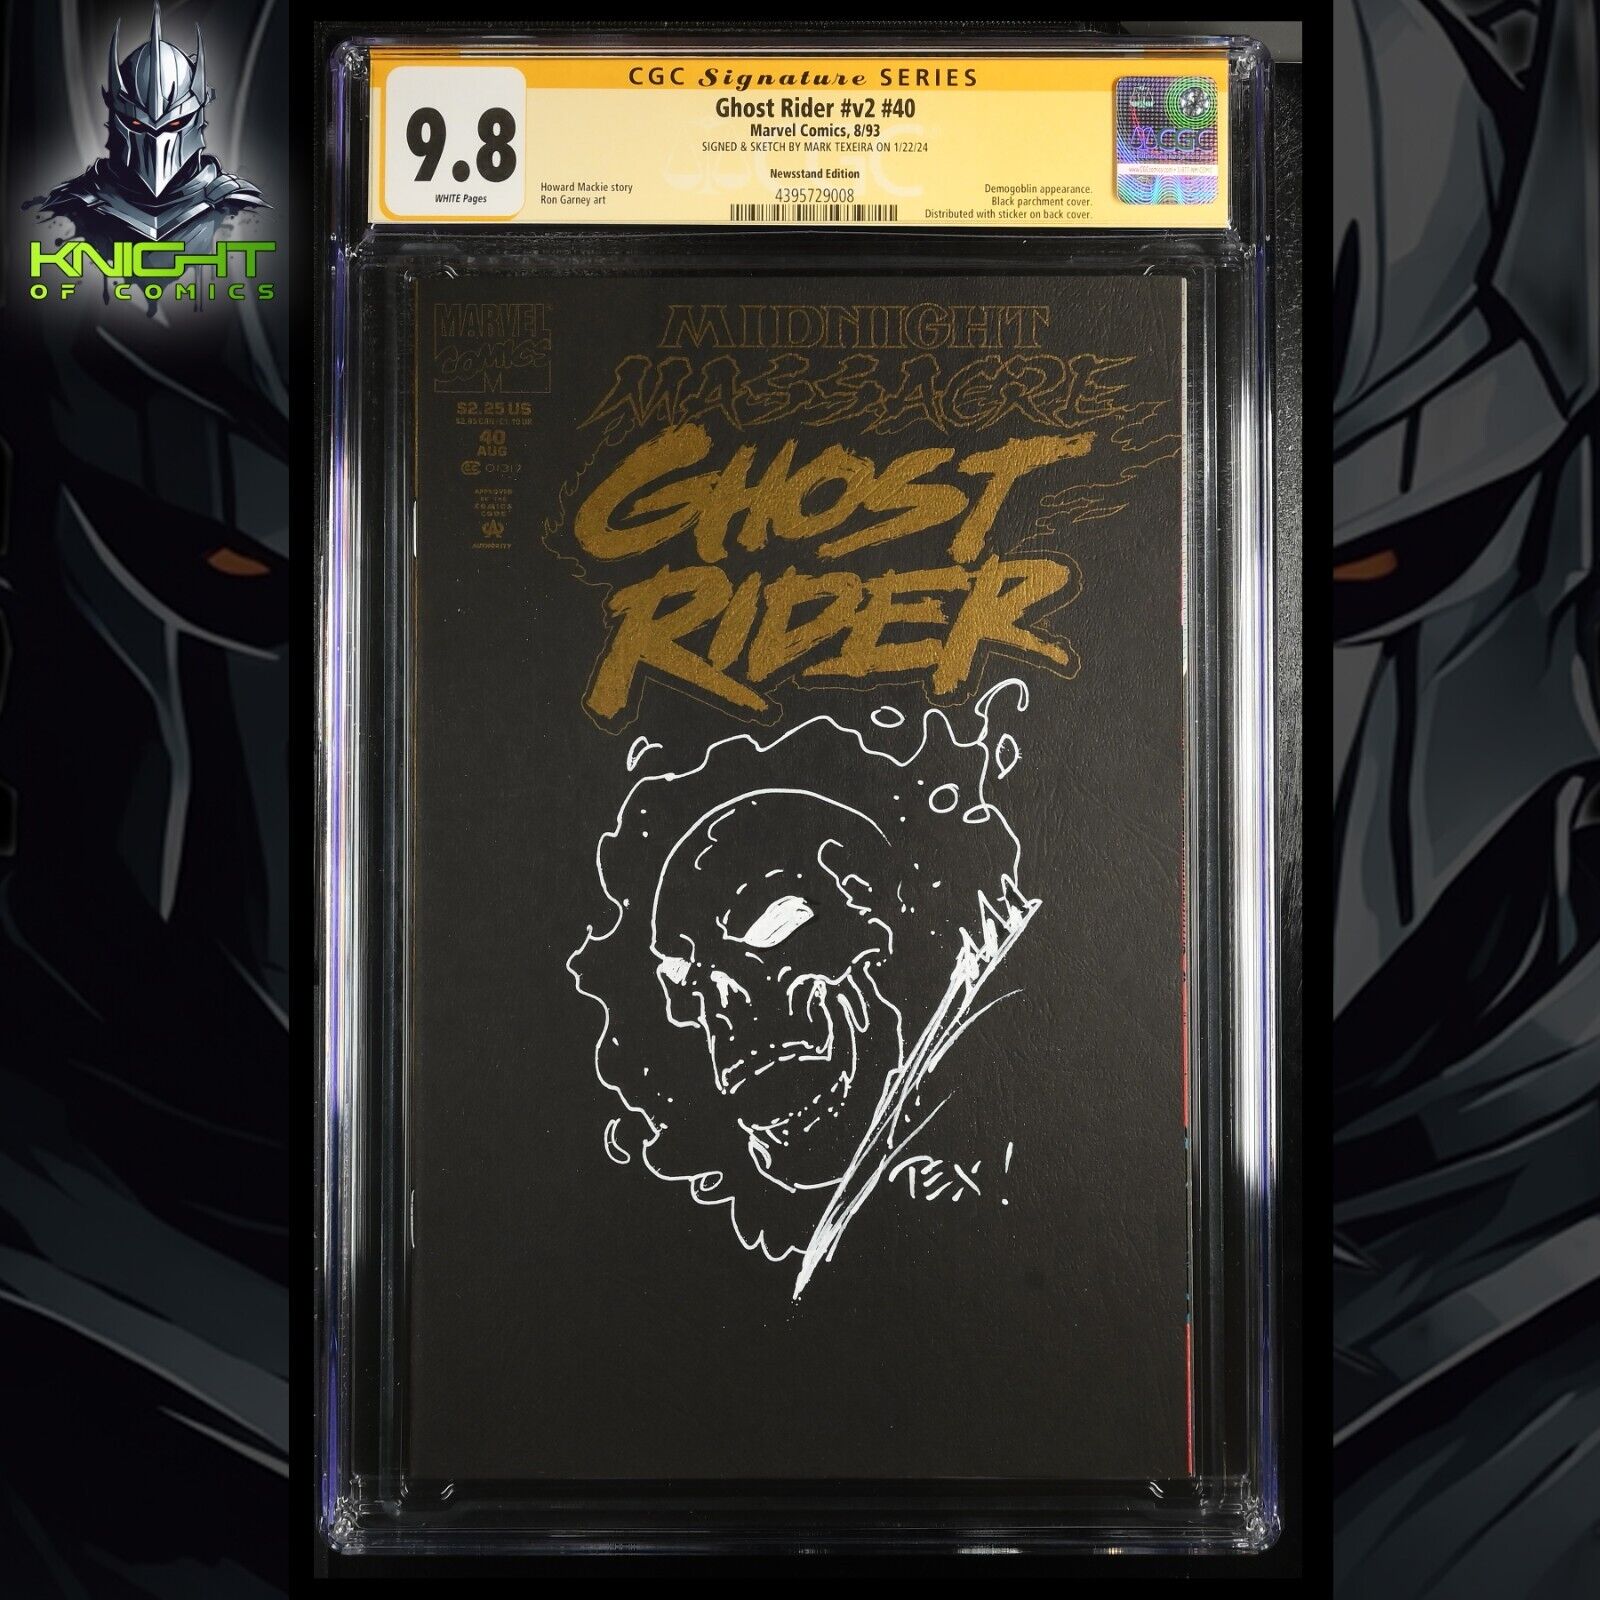 GHOST RIDER v2 #40 - RON GARNEY ART SIGNED & SKETCH BY MARK TEXEIRA CGC 9.8